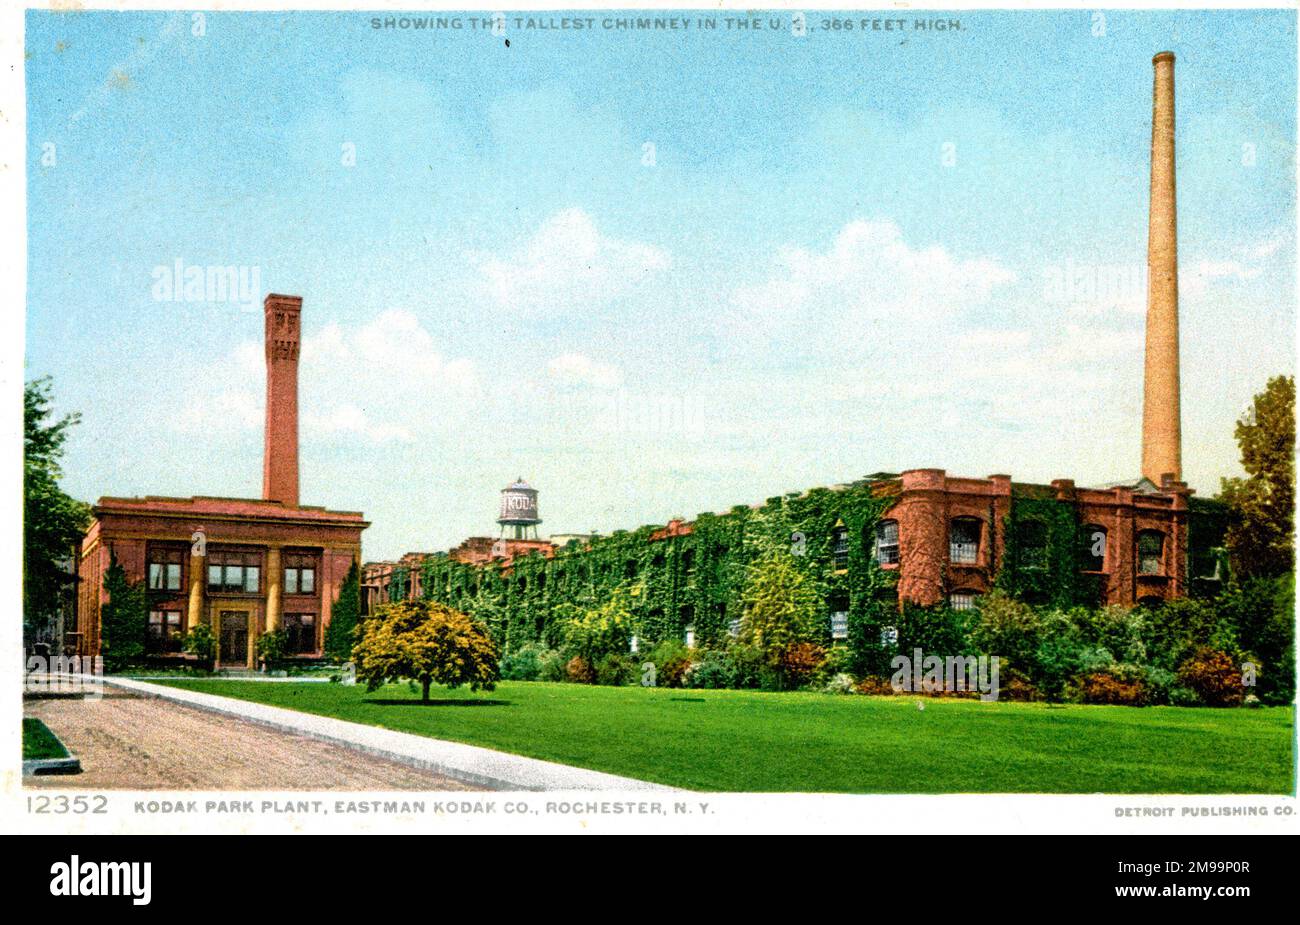 Eastman Kodak Camera and Film Factory, Rochester, New York State, USA, claiming the tallest chimney in America, at 366 feet high. Stock Photo